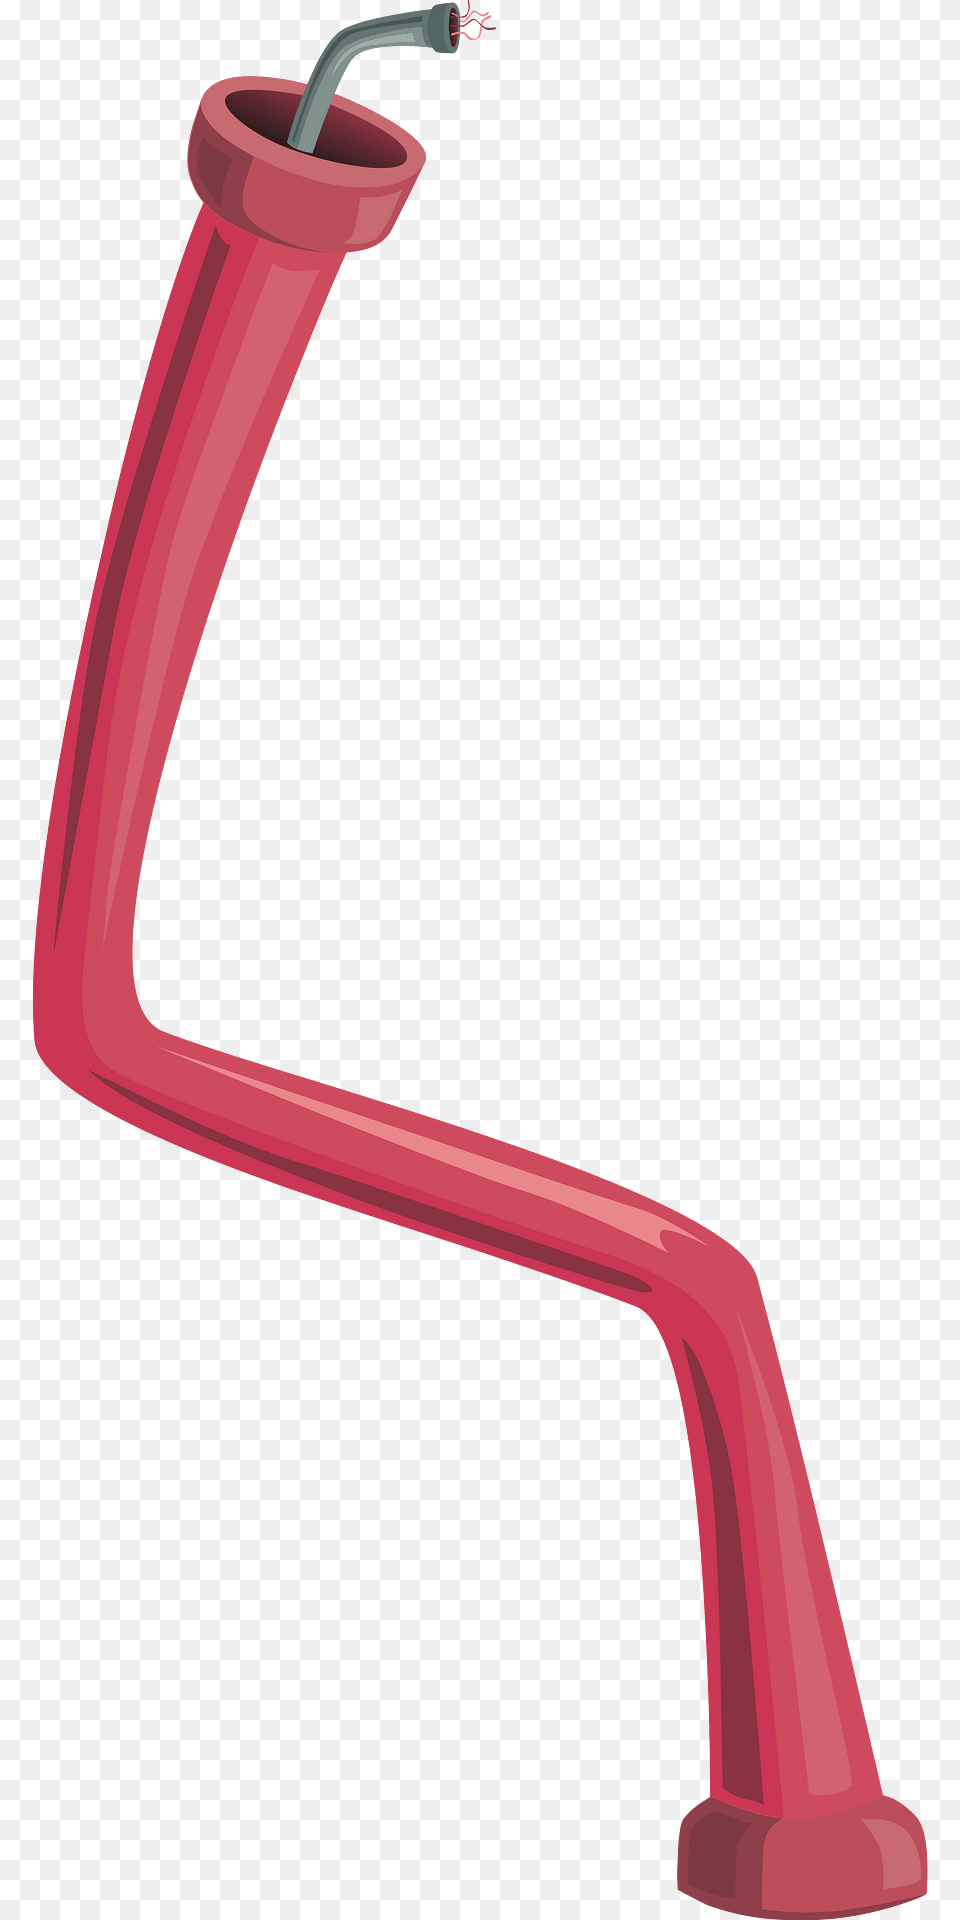 Red Bent Pipe Clipart, Handrail, Sink, Sink Faucet, Smoke Pipe Free Transparent Png